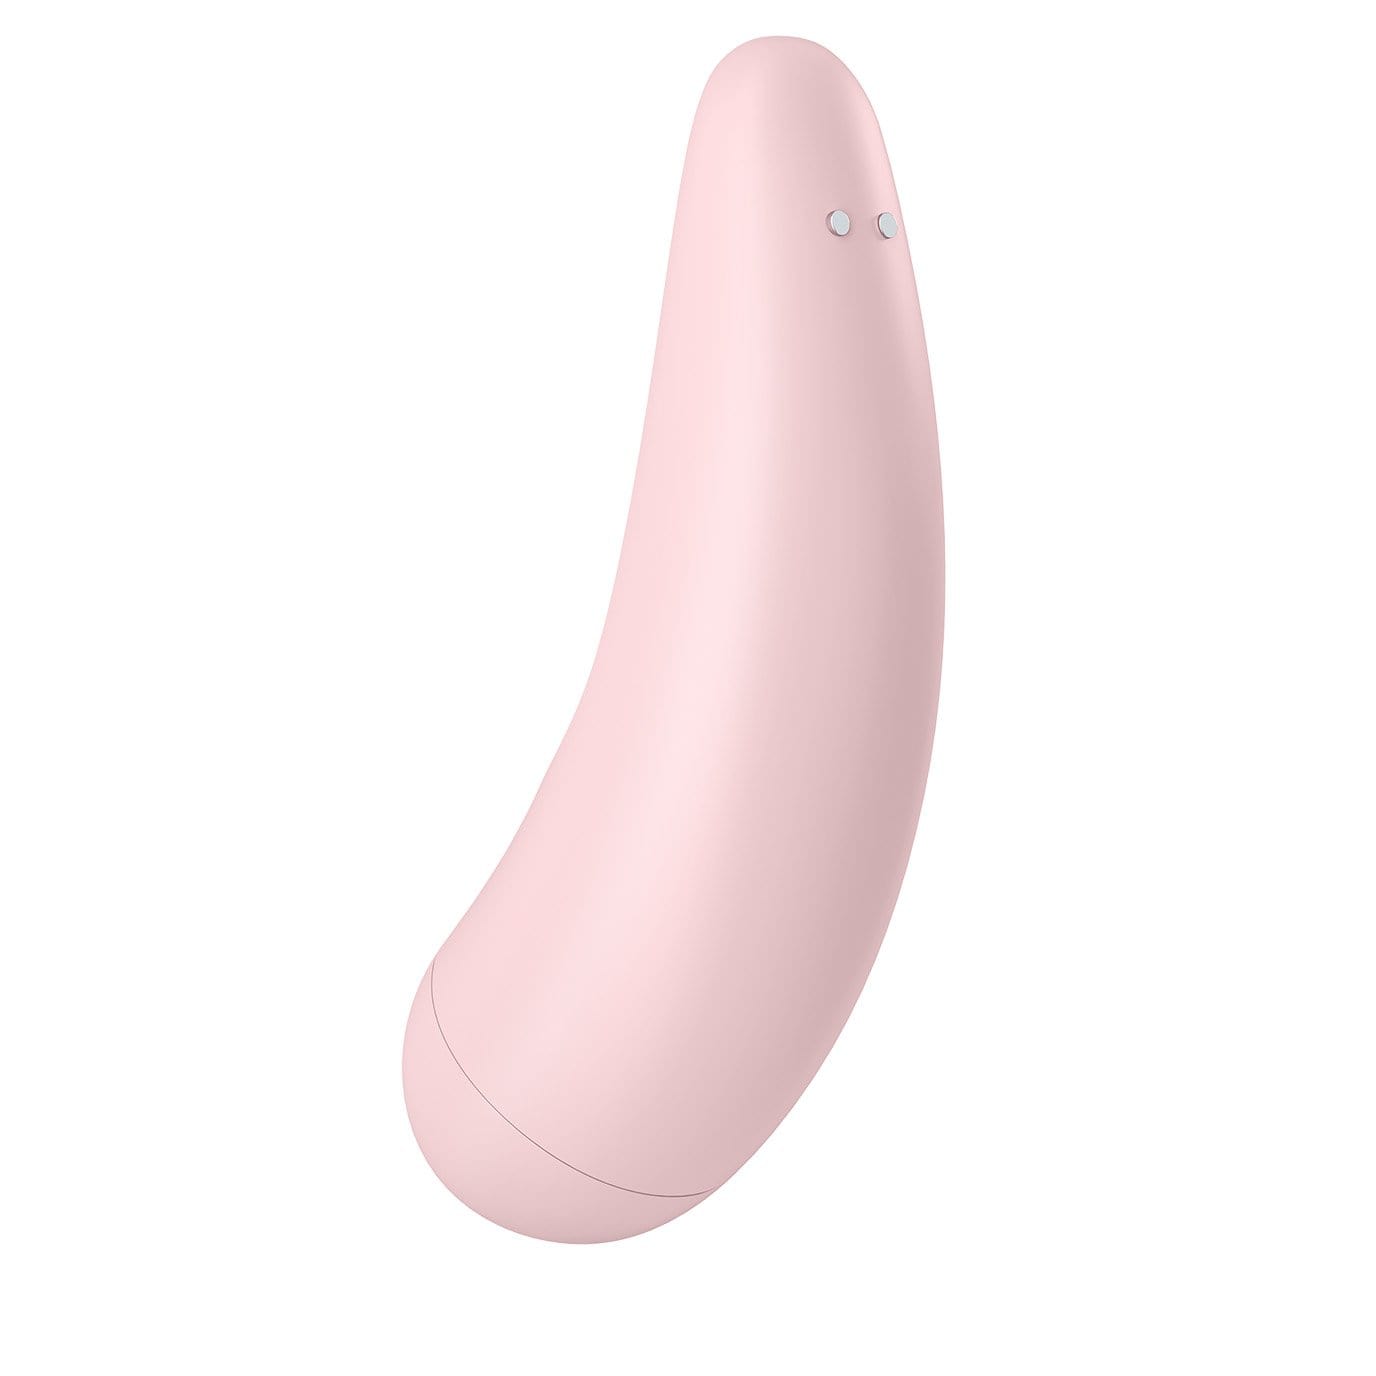 Satisfyer - Curvy 2+ App-Controlled Air Pulse Stimulator Vibrator (Pink) Clit Massager (Vibration) Rechargeable 289885180 CherryAffairs